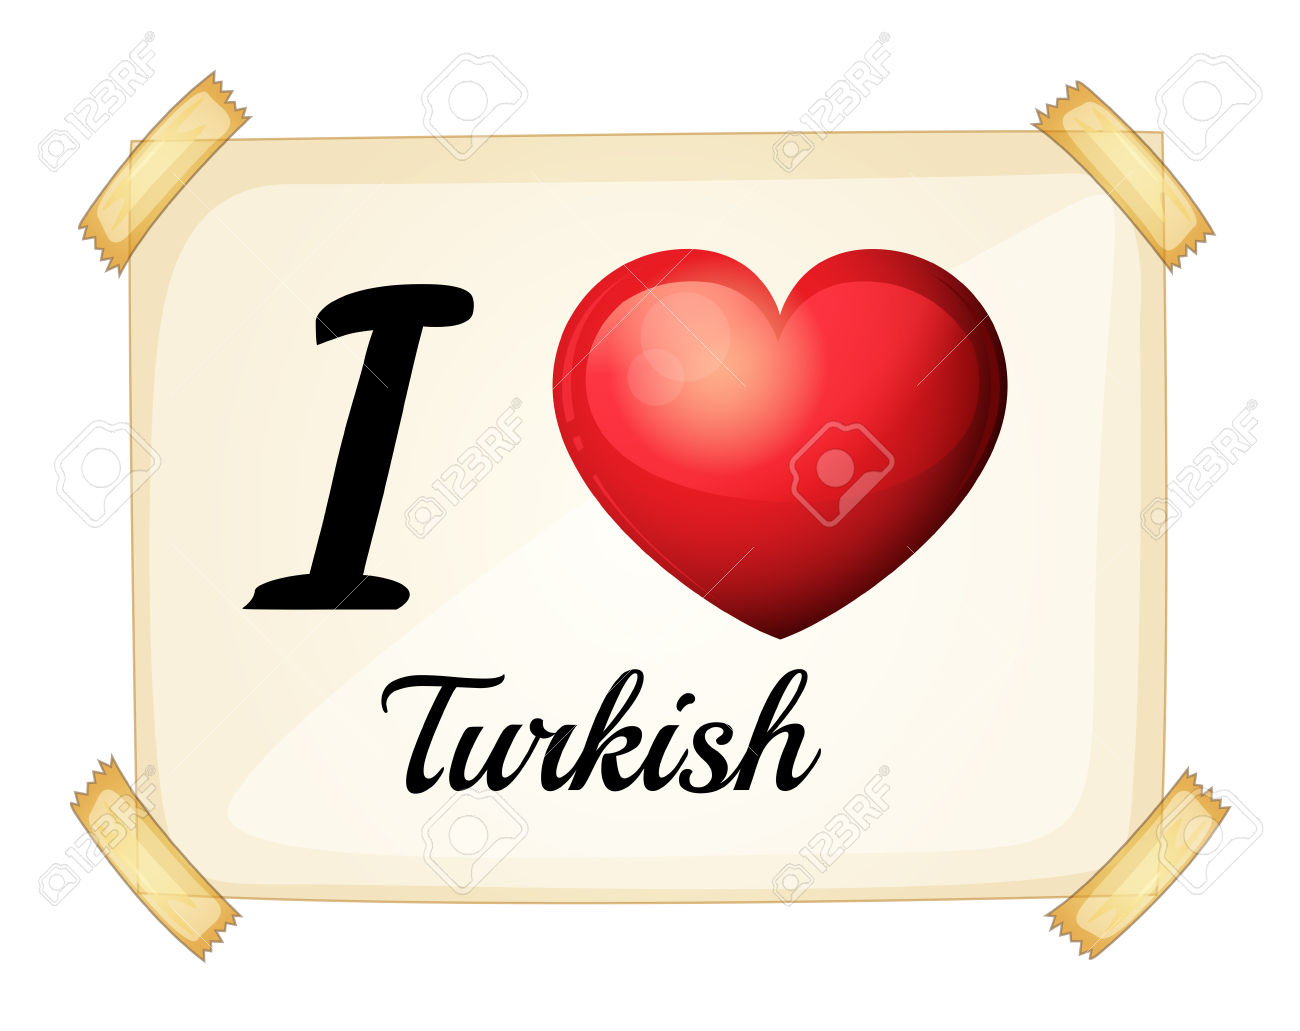 I Love Turkish Posted On The Wall Royalty Free Cliparts, Vectors.